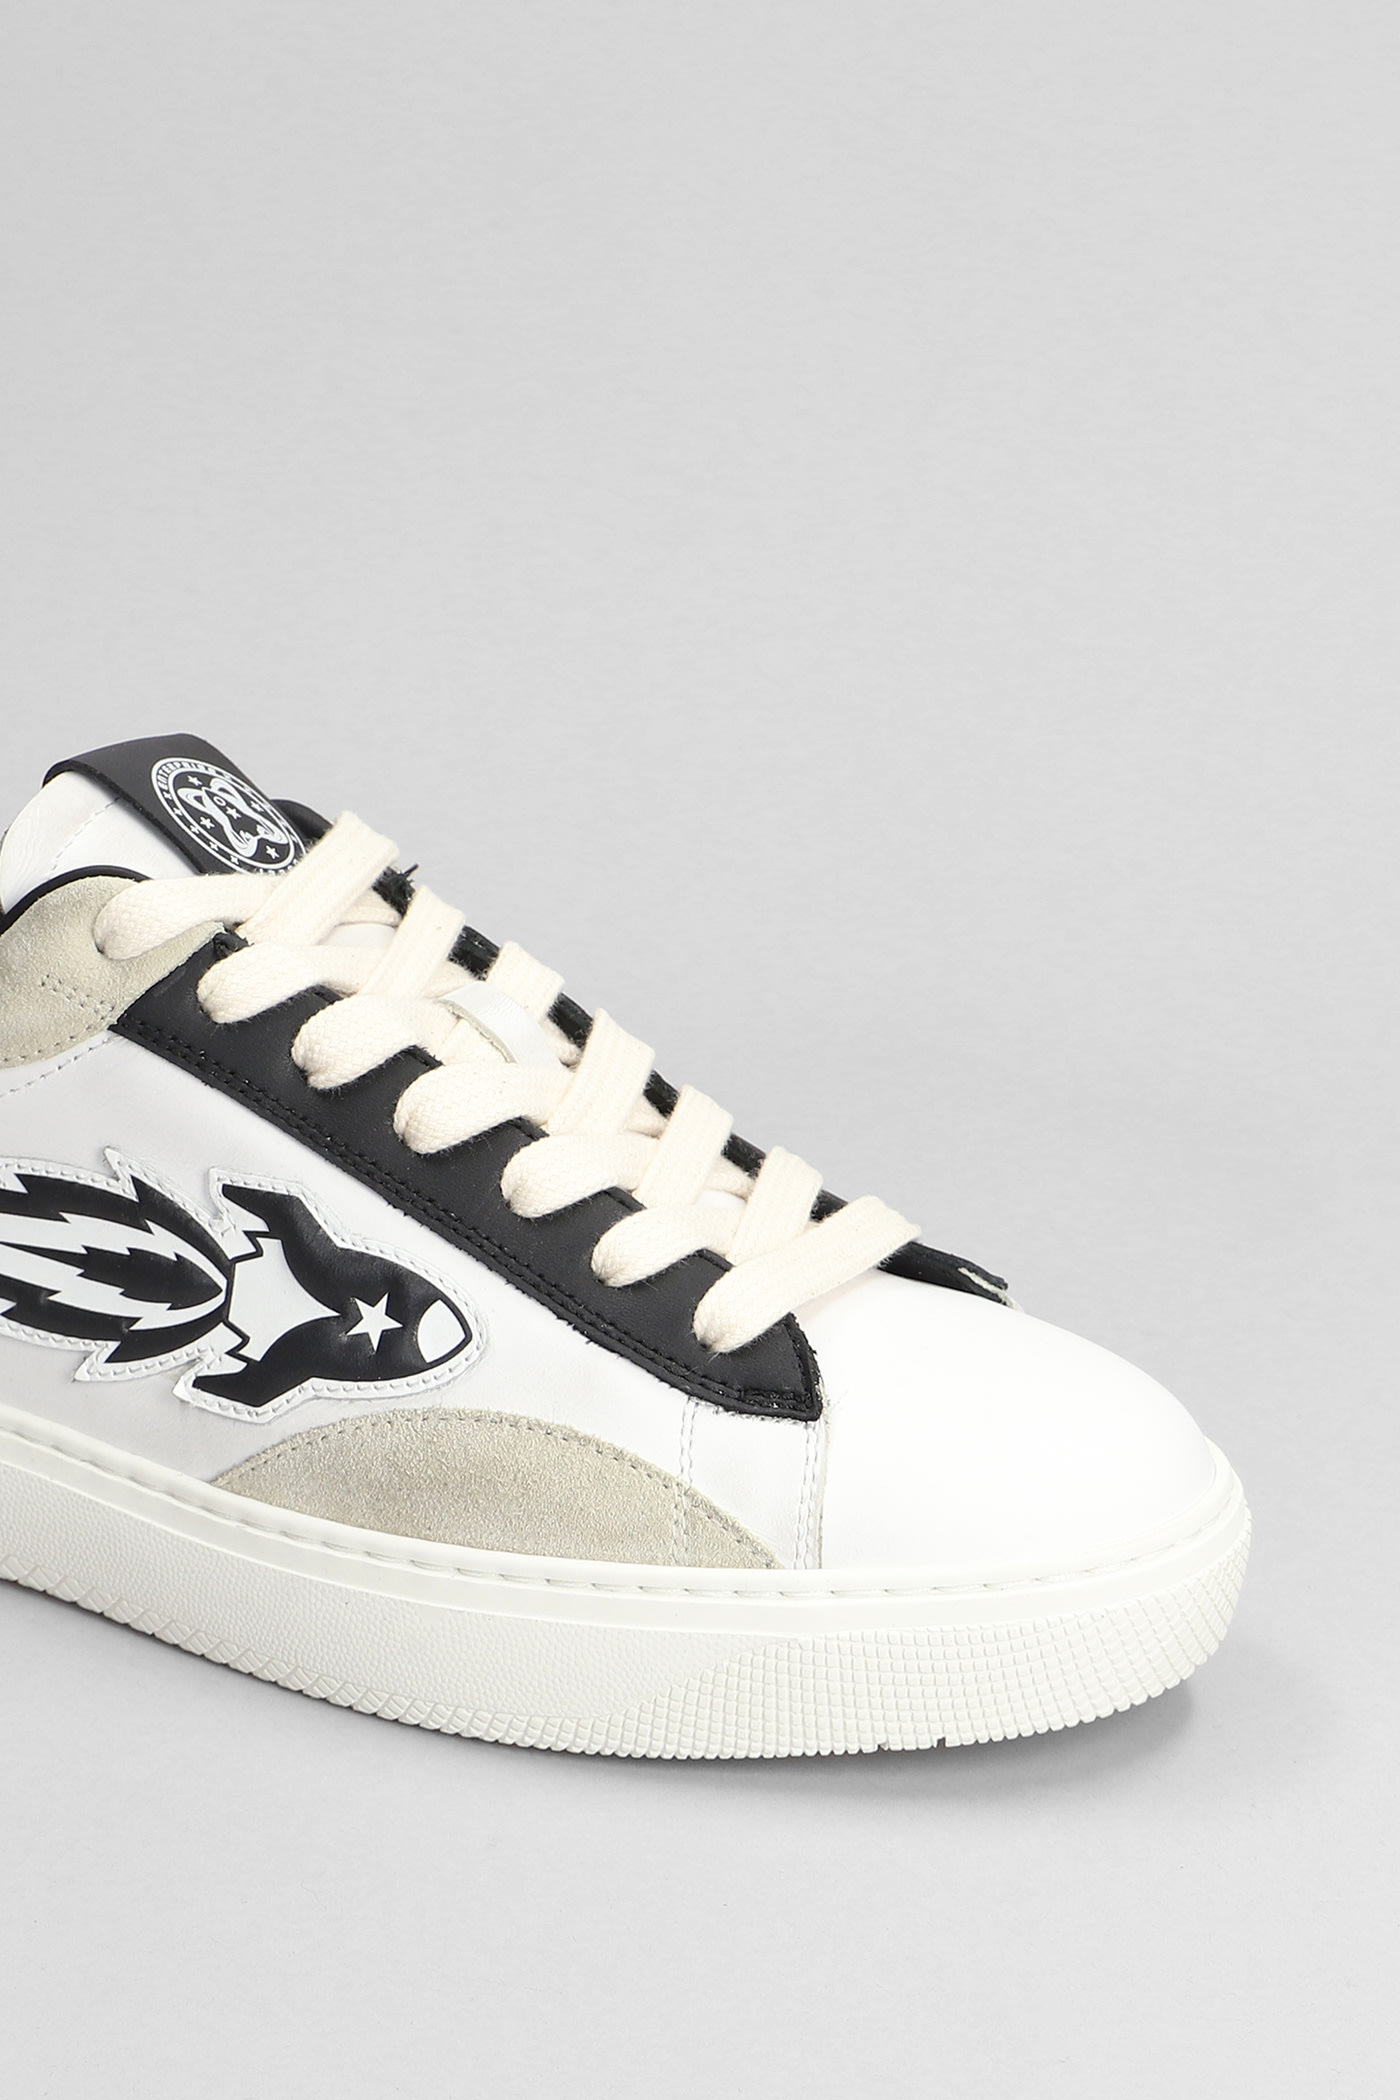 Shop Enterprise Japan Sneakers In White Suede And Leather In White And Black